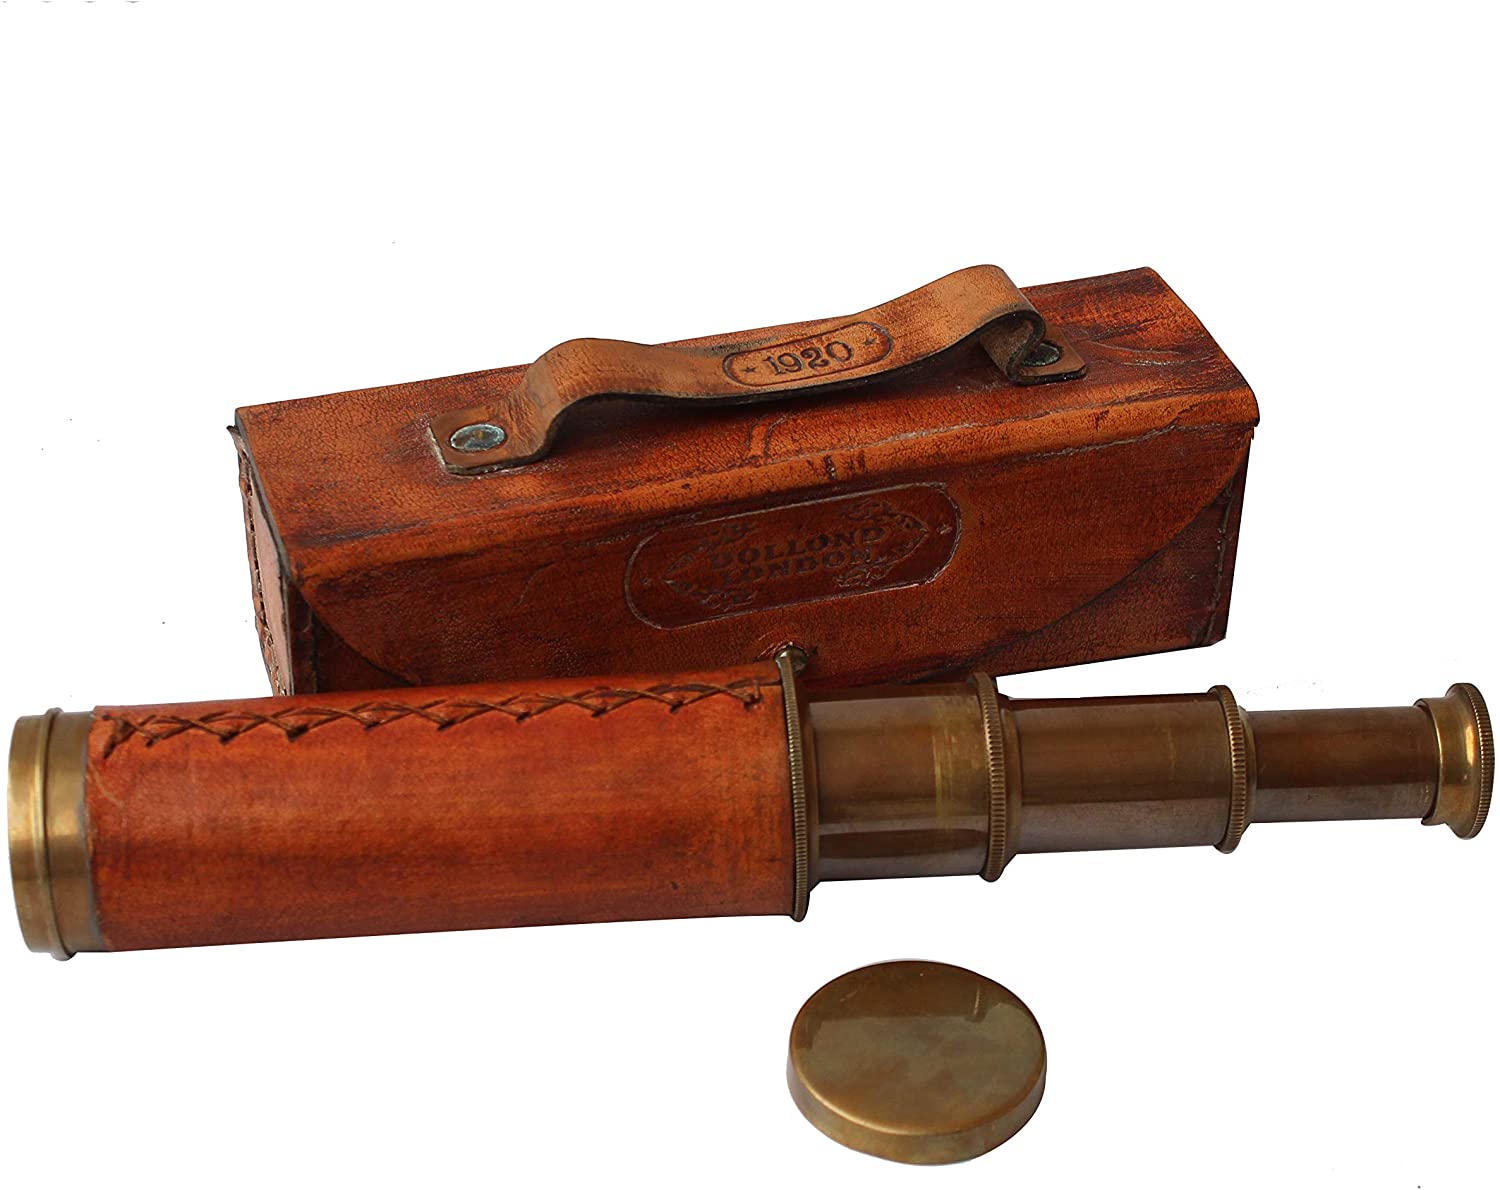 Fully Handcrafted Vintage Telescope in a Leather Box